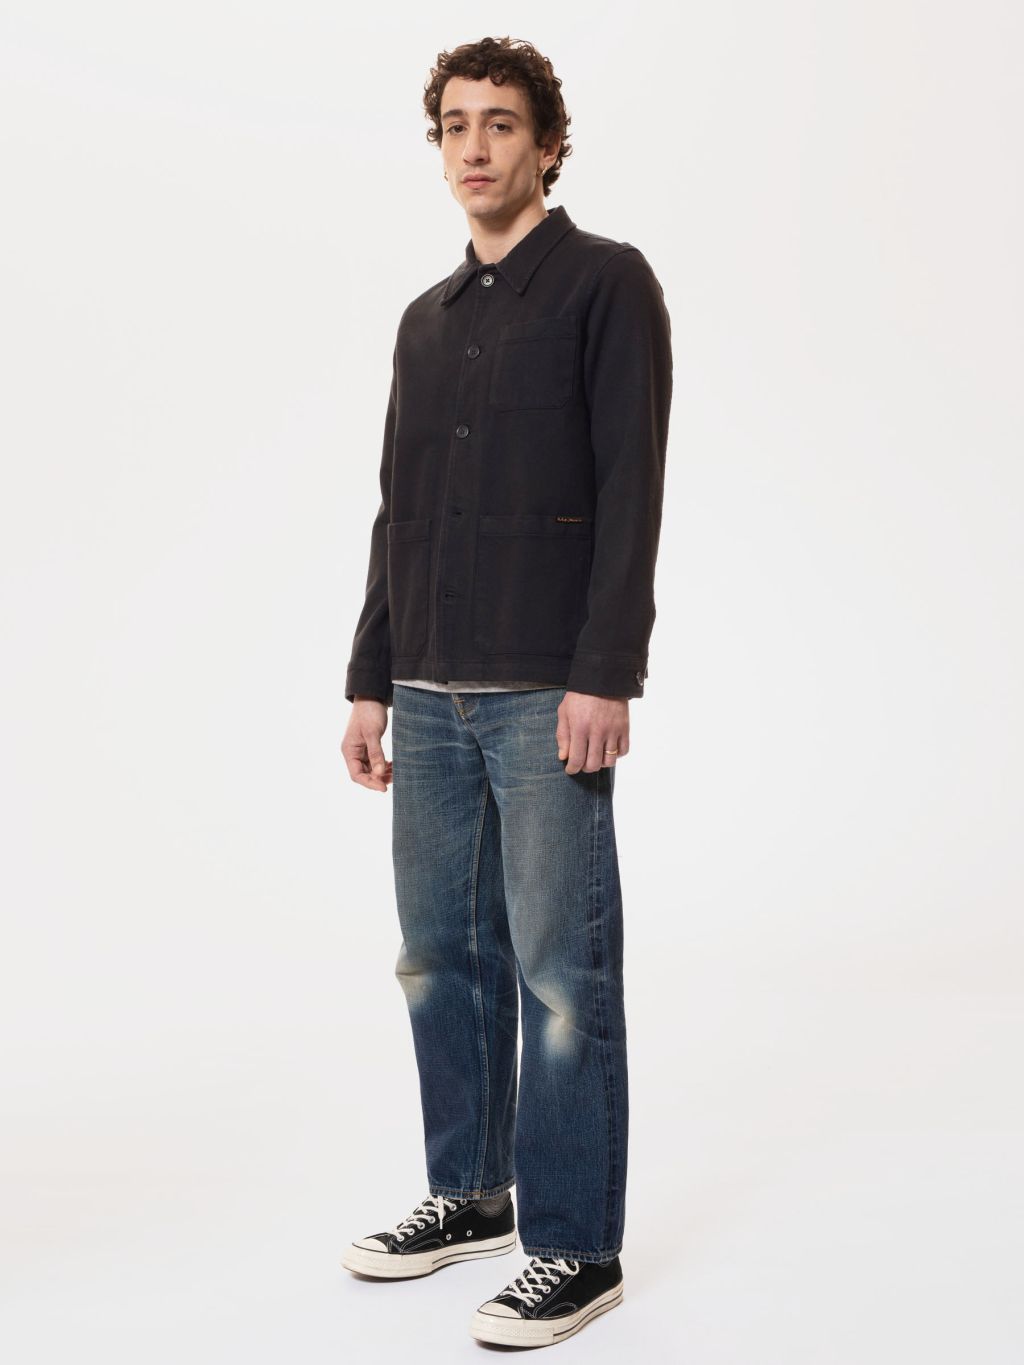 Barney Worker Jacket Organic And Fairtrade Cotton